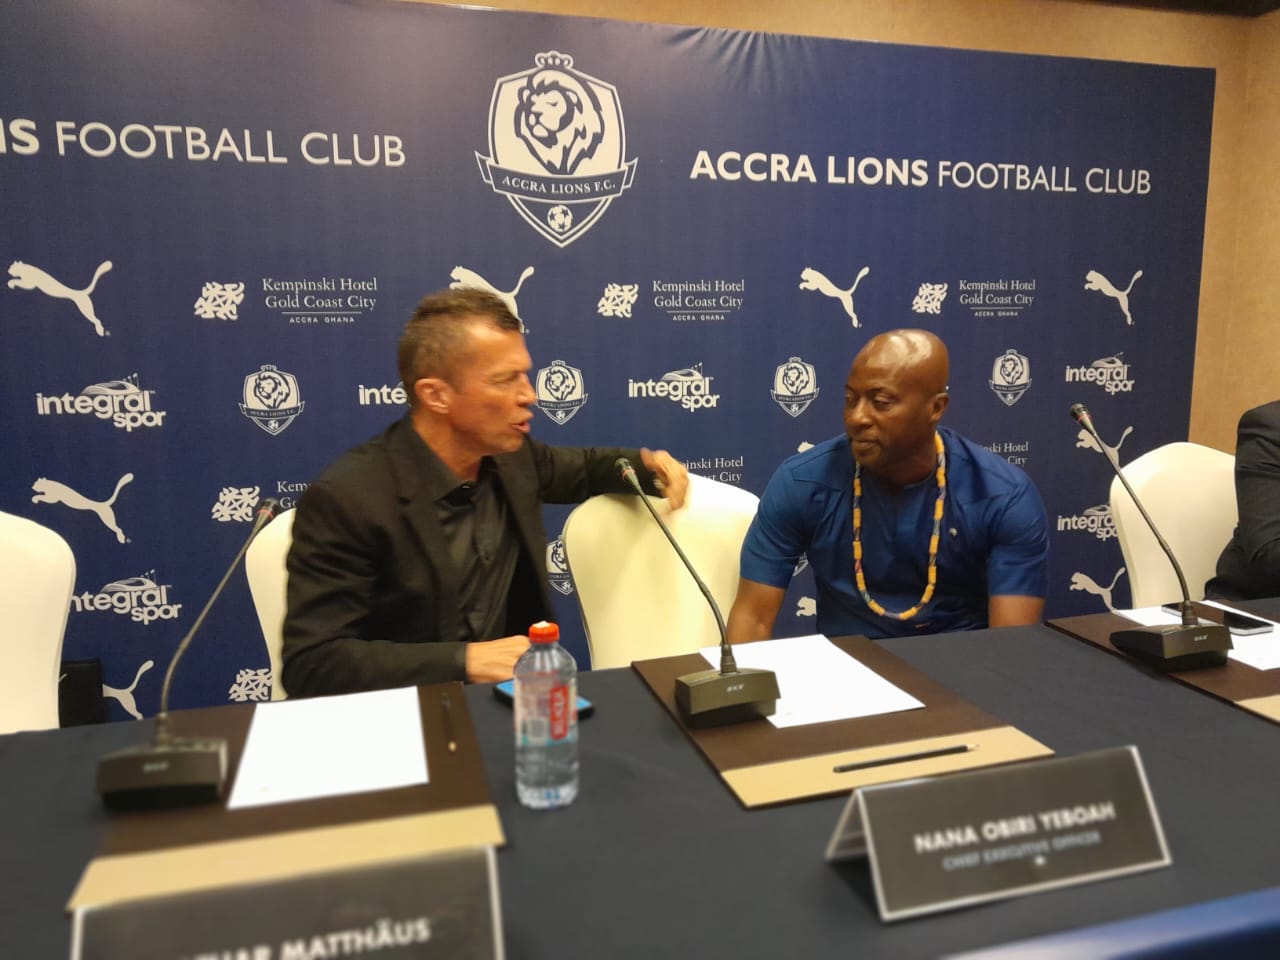 Lothar Matthäus reveals he was excited when Accra Lions defeated ‘best team’ Aduana Stars